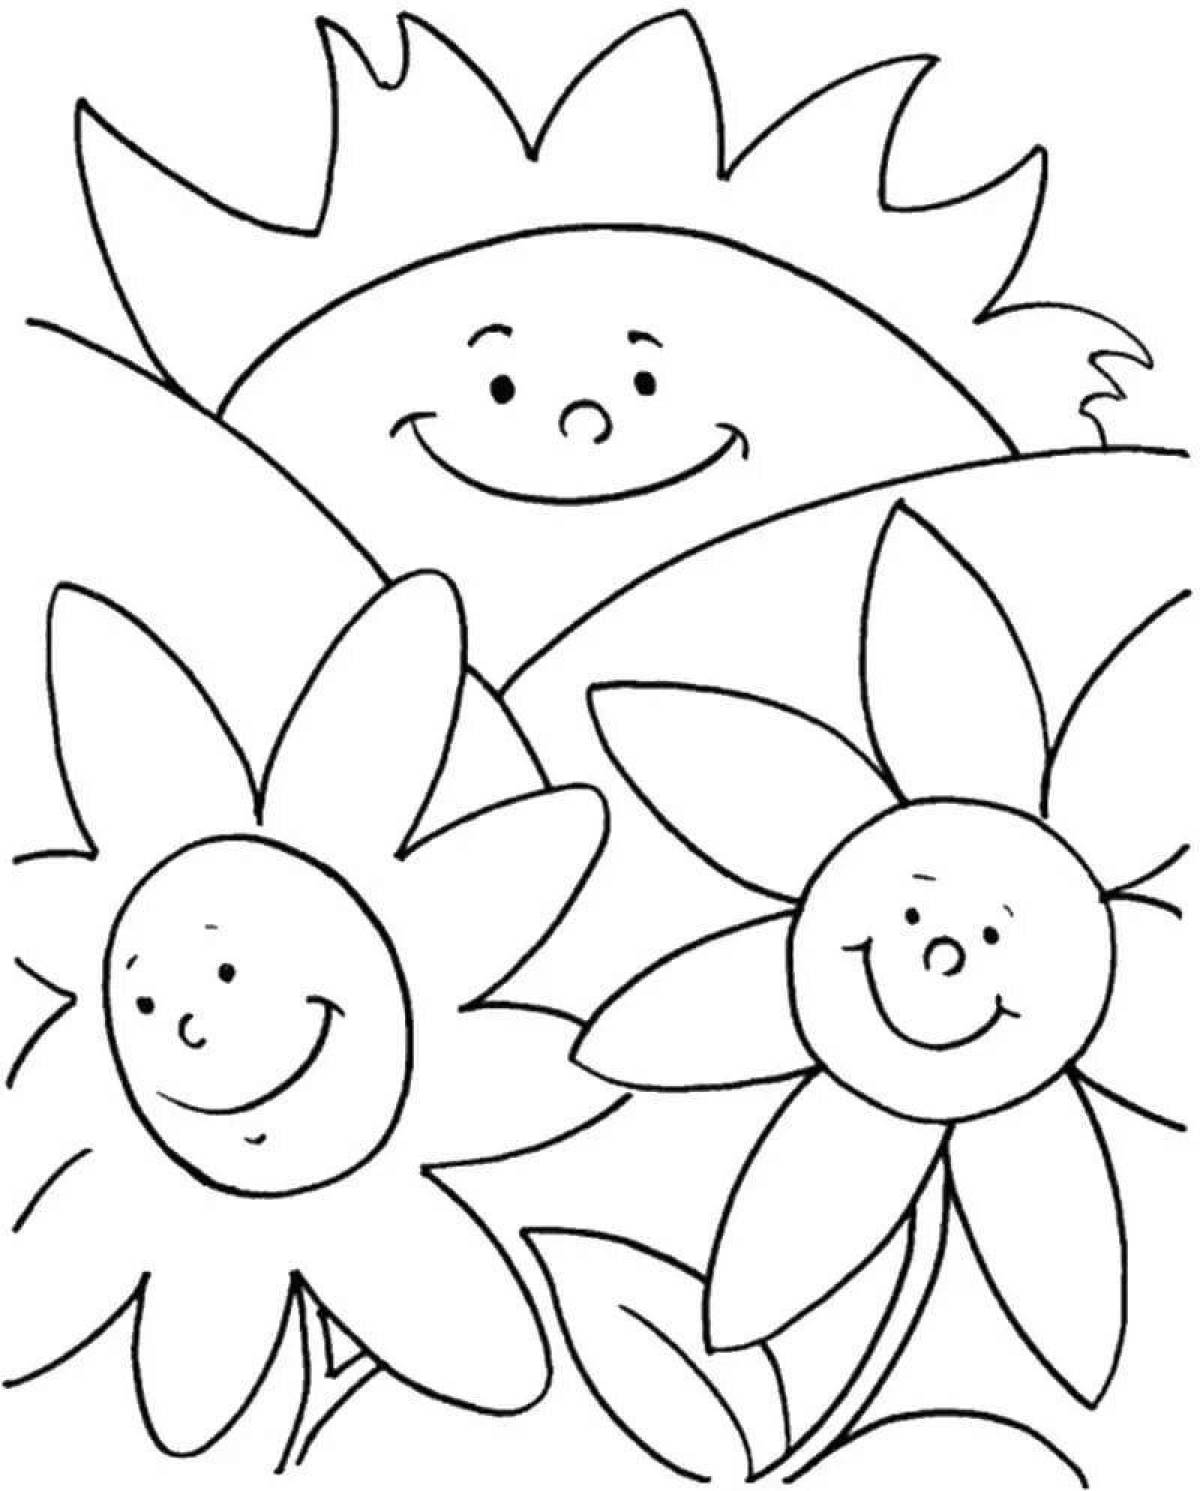 Live coloring sun for children 4-5 years old